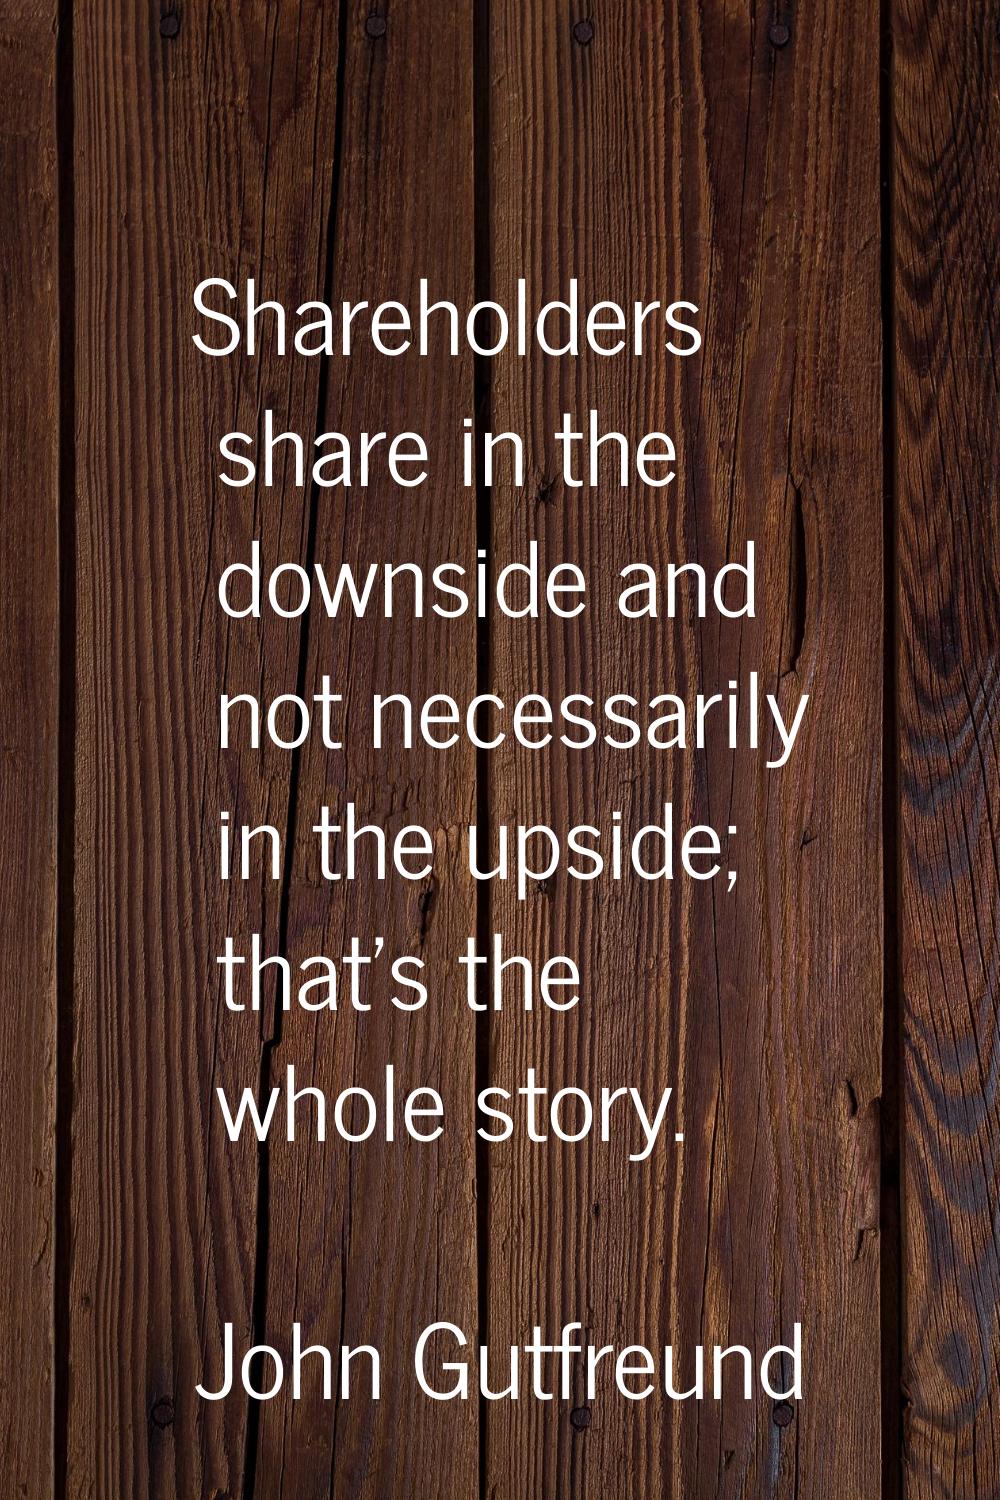 Shareholders share in the downside and not necessarily in the upside; that's the whole story.